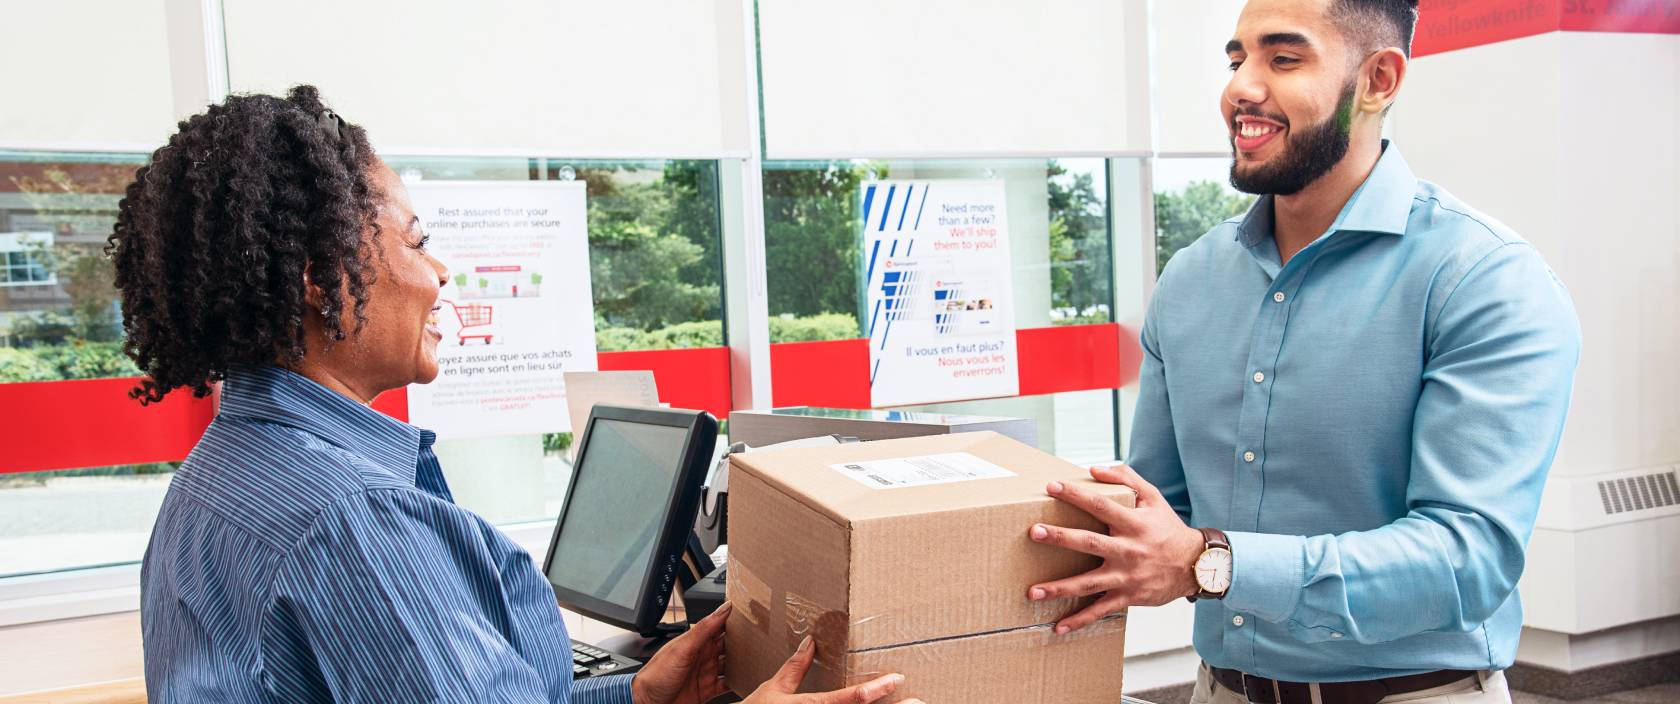 A smiling Canada Post retail employee hands a package to a man from behind a post office counter.